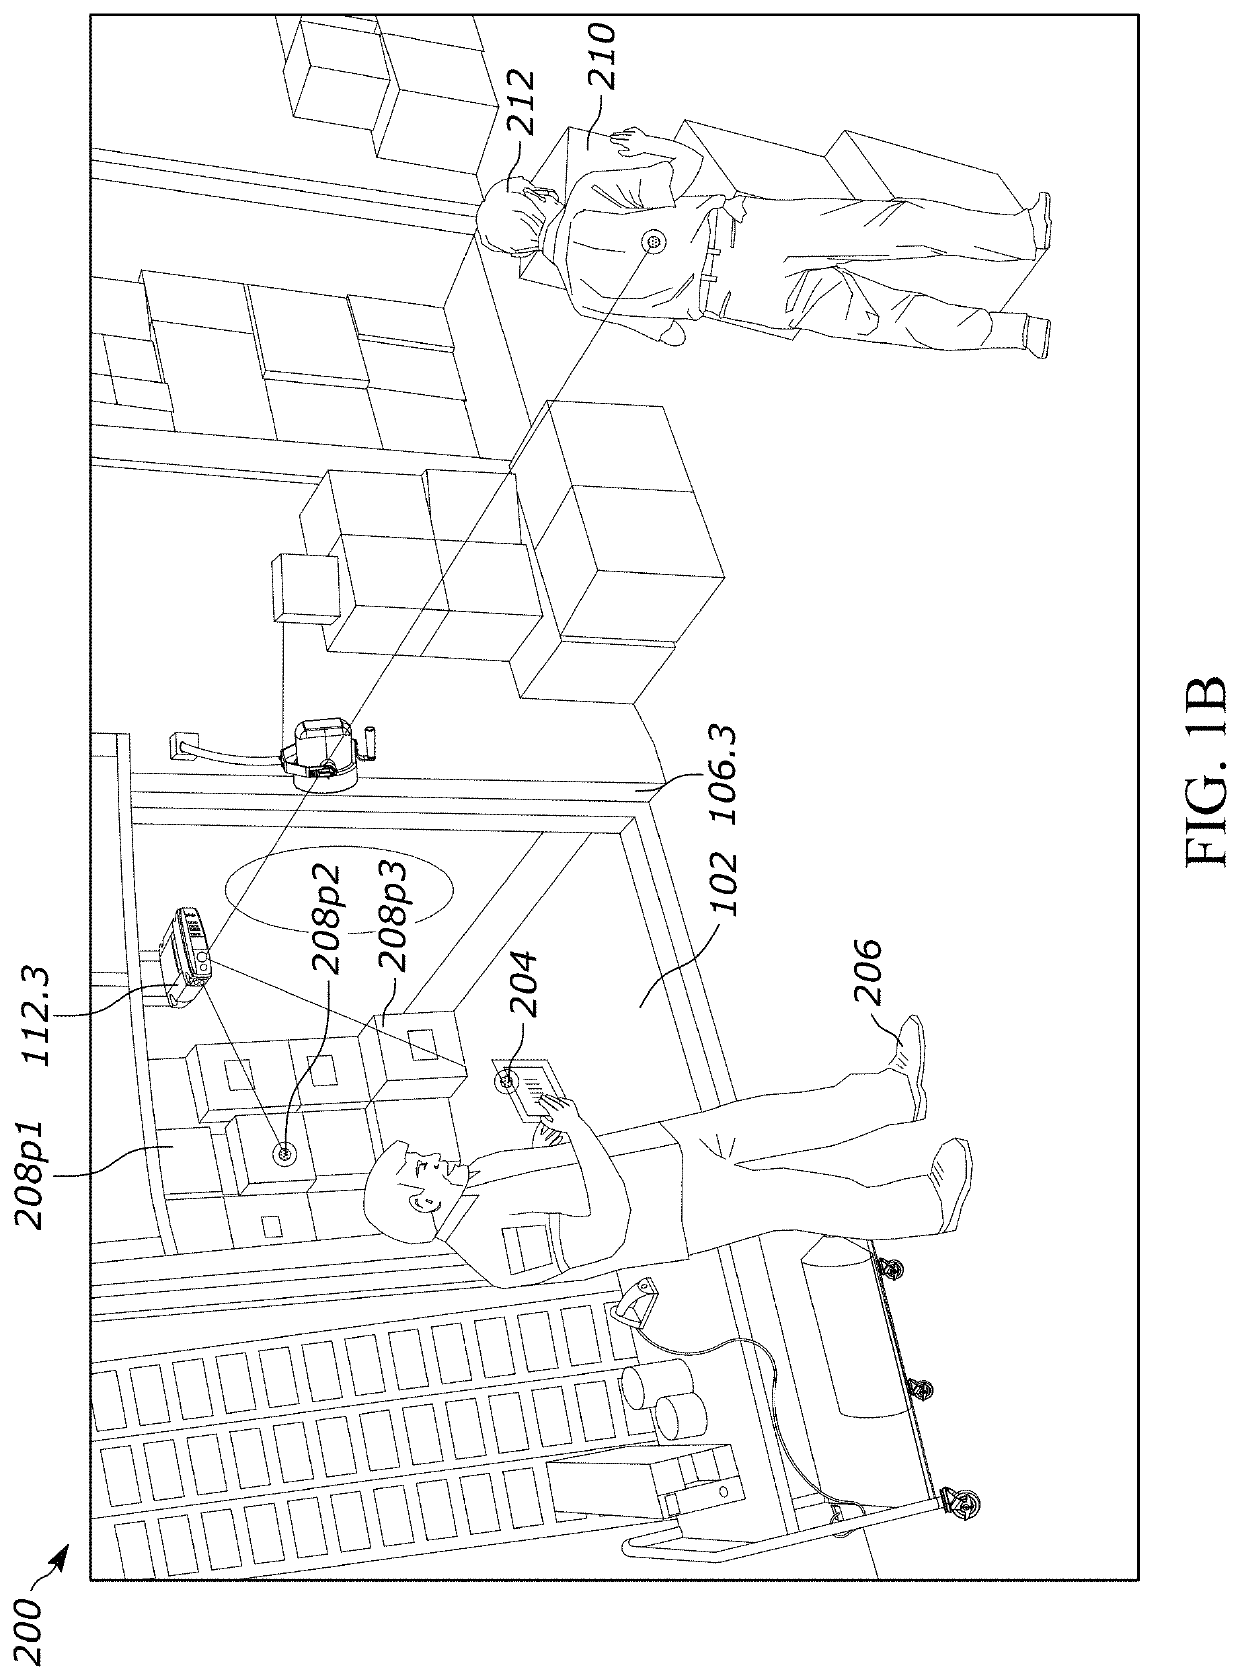 Method for Detecting Trailer Status Using Combined 3D Algorithms and 2D Machine Learning Models